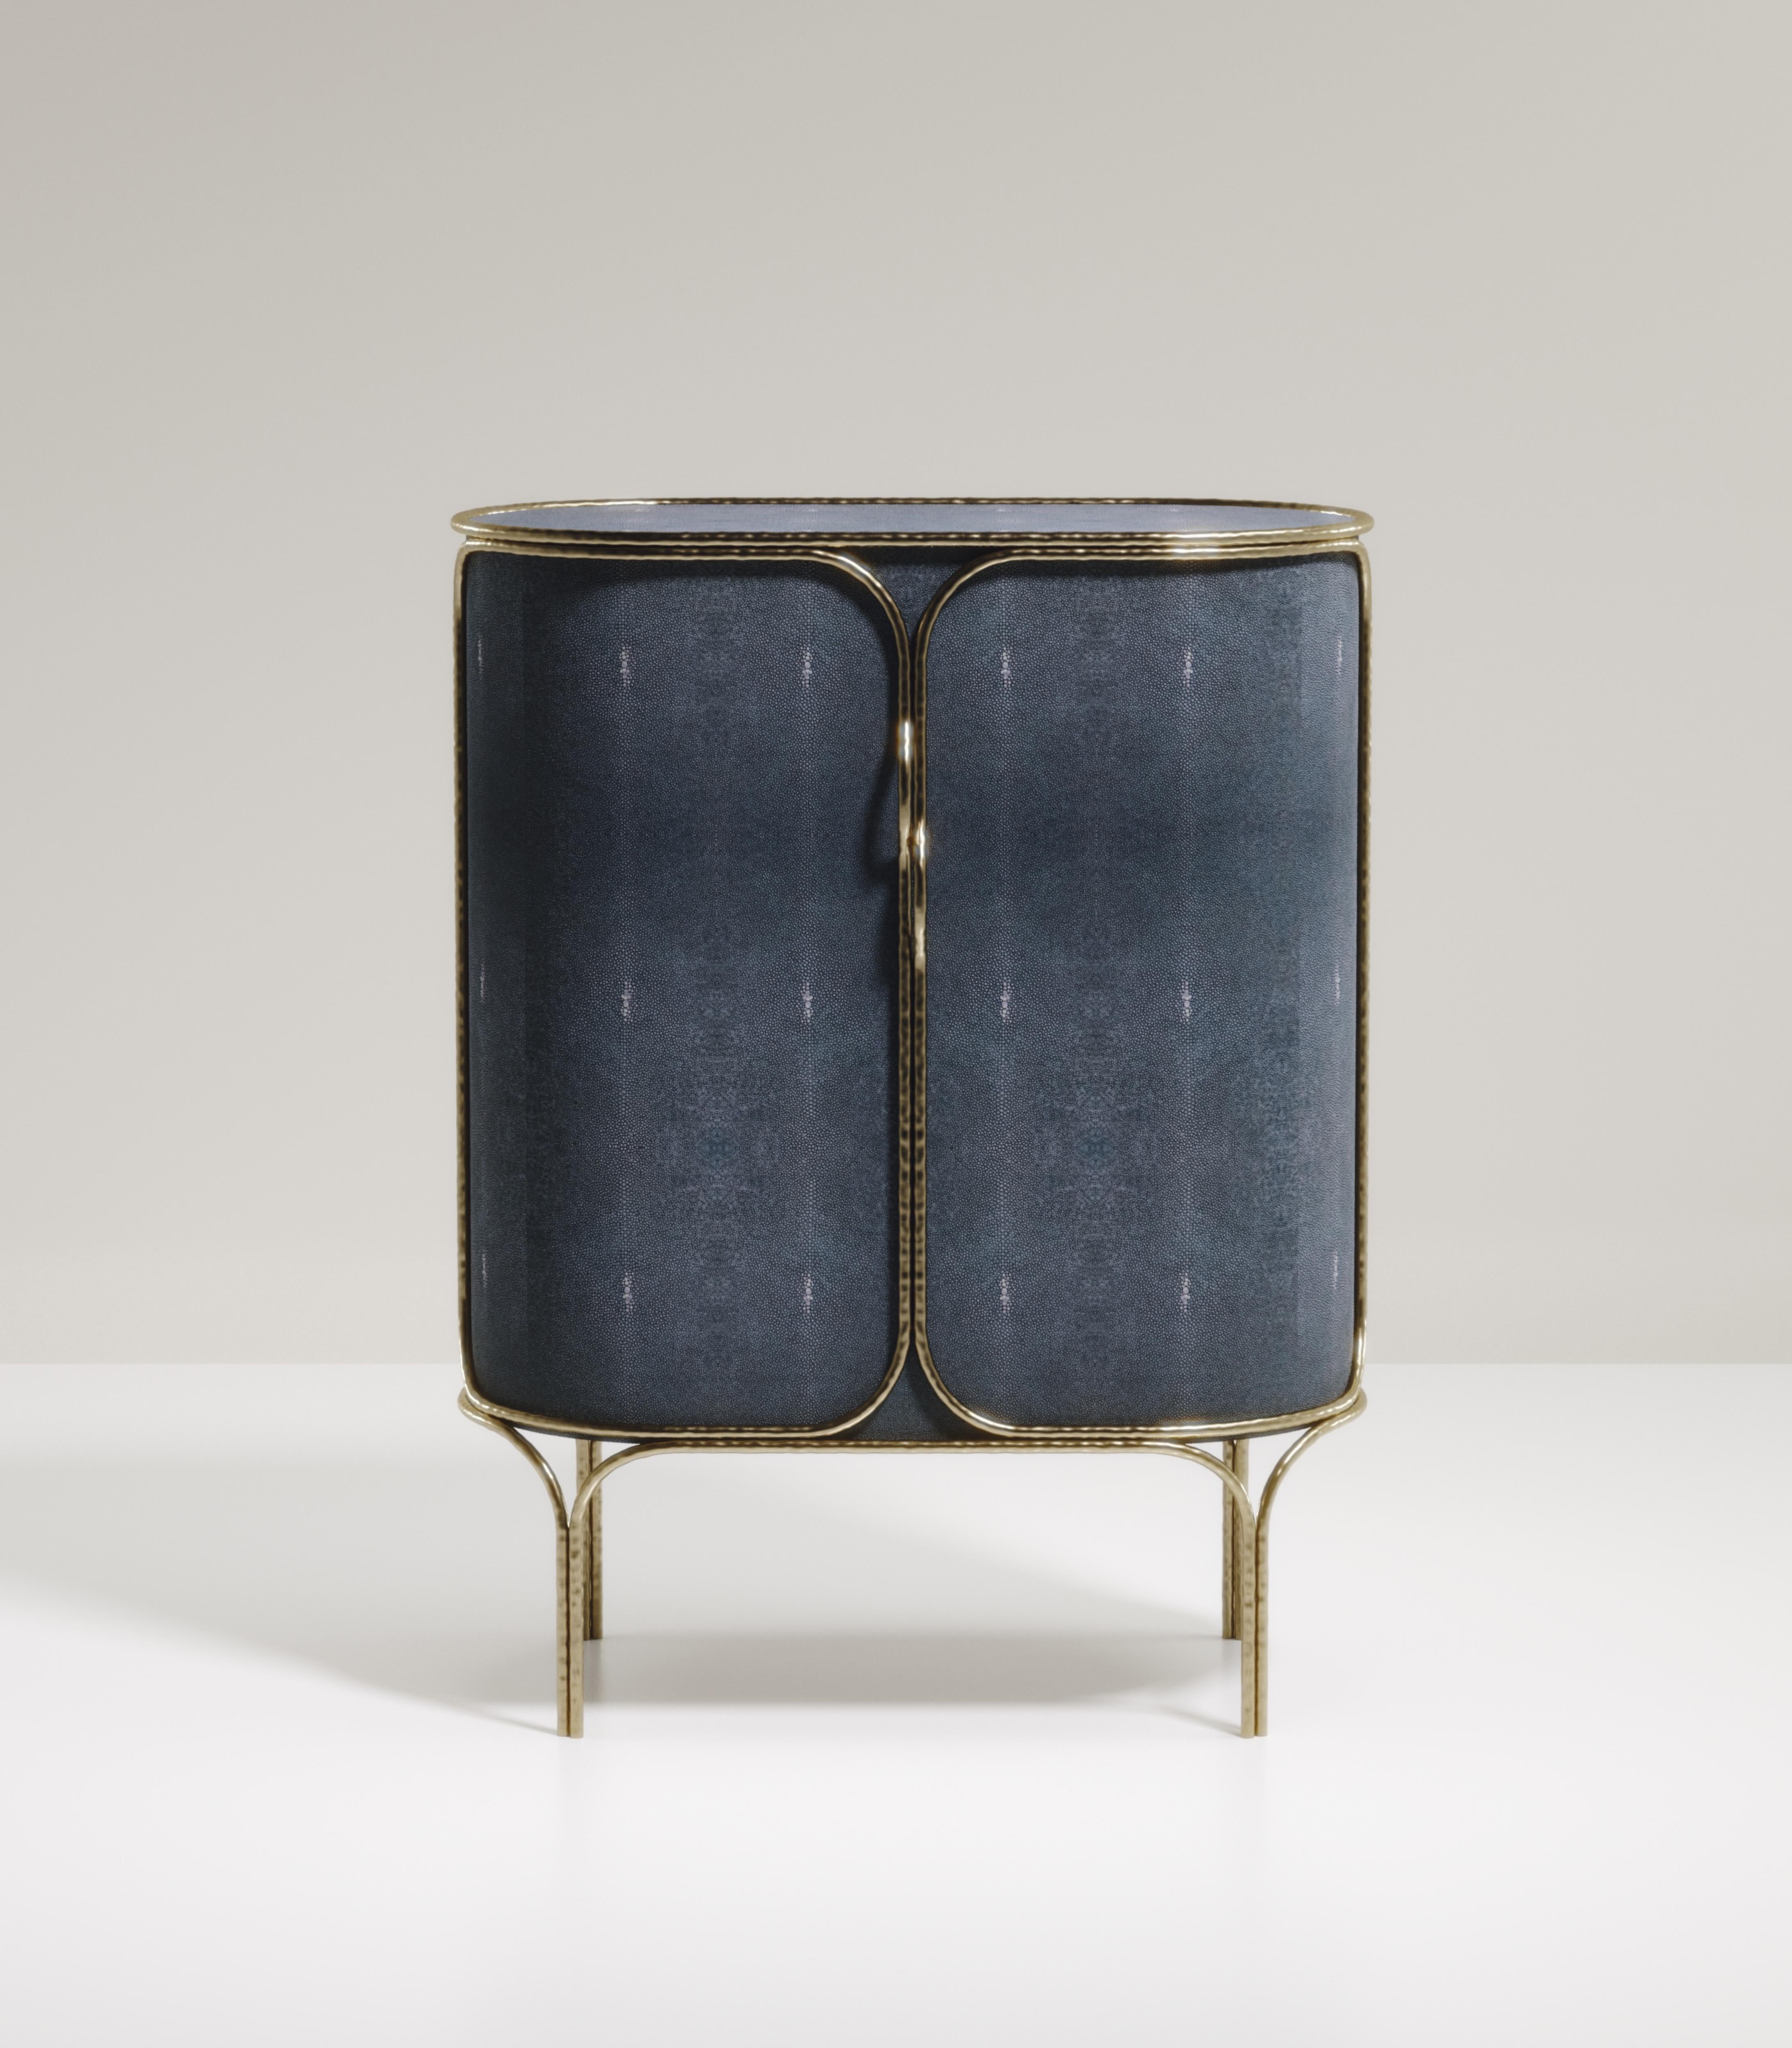 The Arianne bar Cabinet by R&Y Augousti is one of a kind statement piece. The overall piece is inlaid in a denim blue shagreen accentuated with intricate bronze-patina brass details that have the signature Augousti 